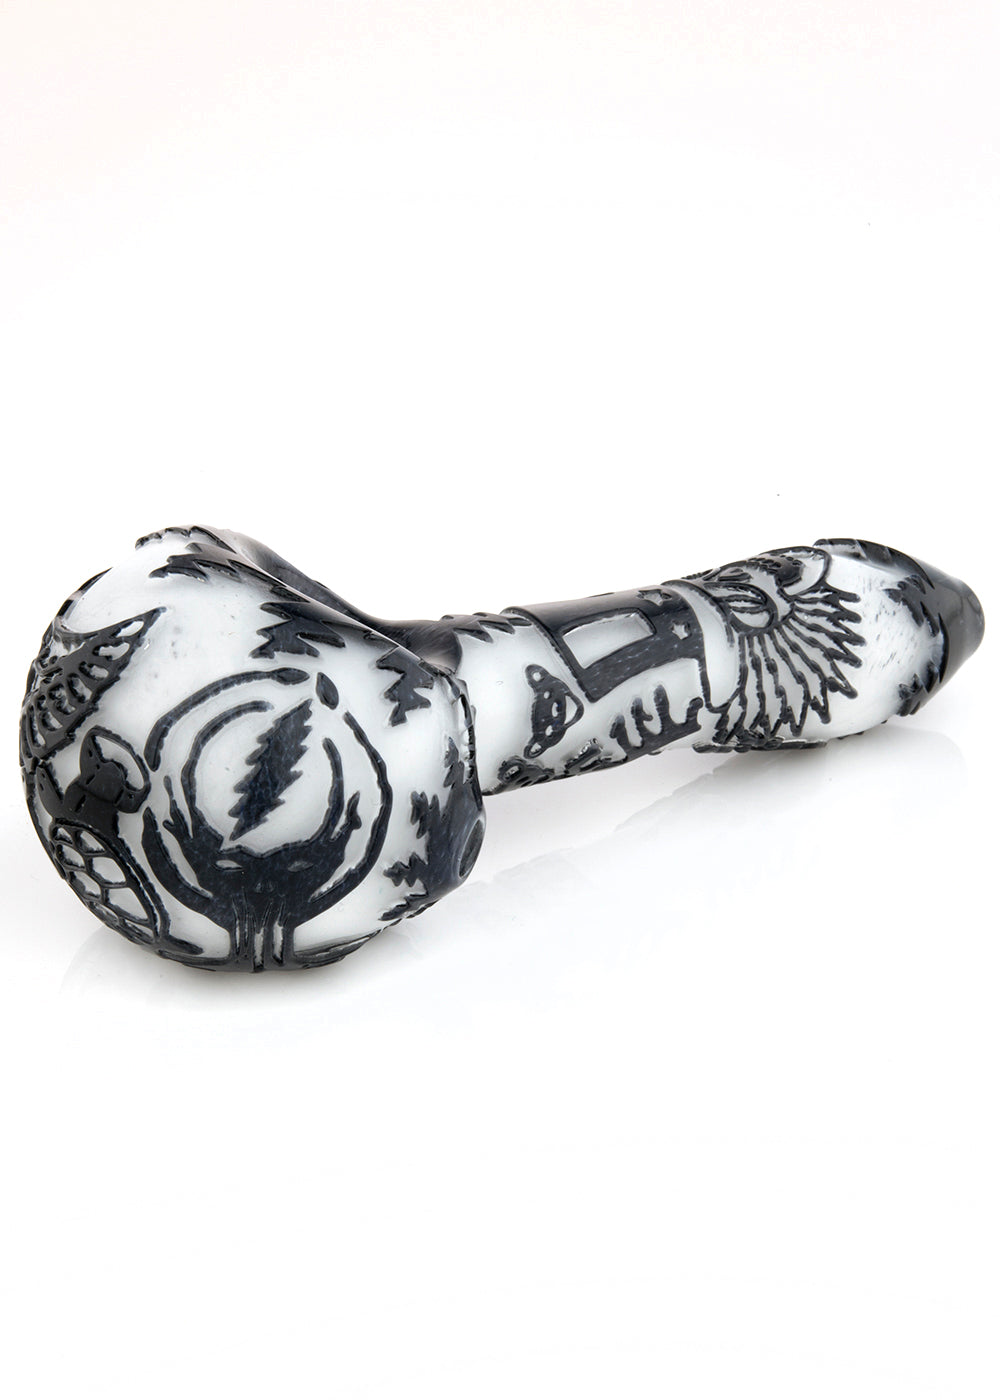 Grateful Dead Frit Over Frit Fire Polished Spoon #3 by Liberty 503